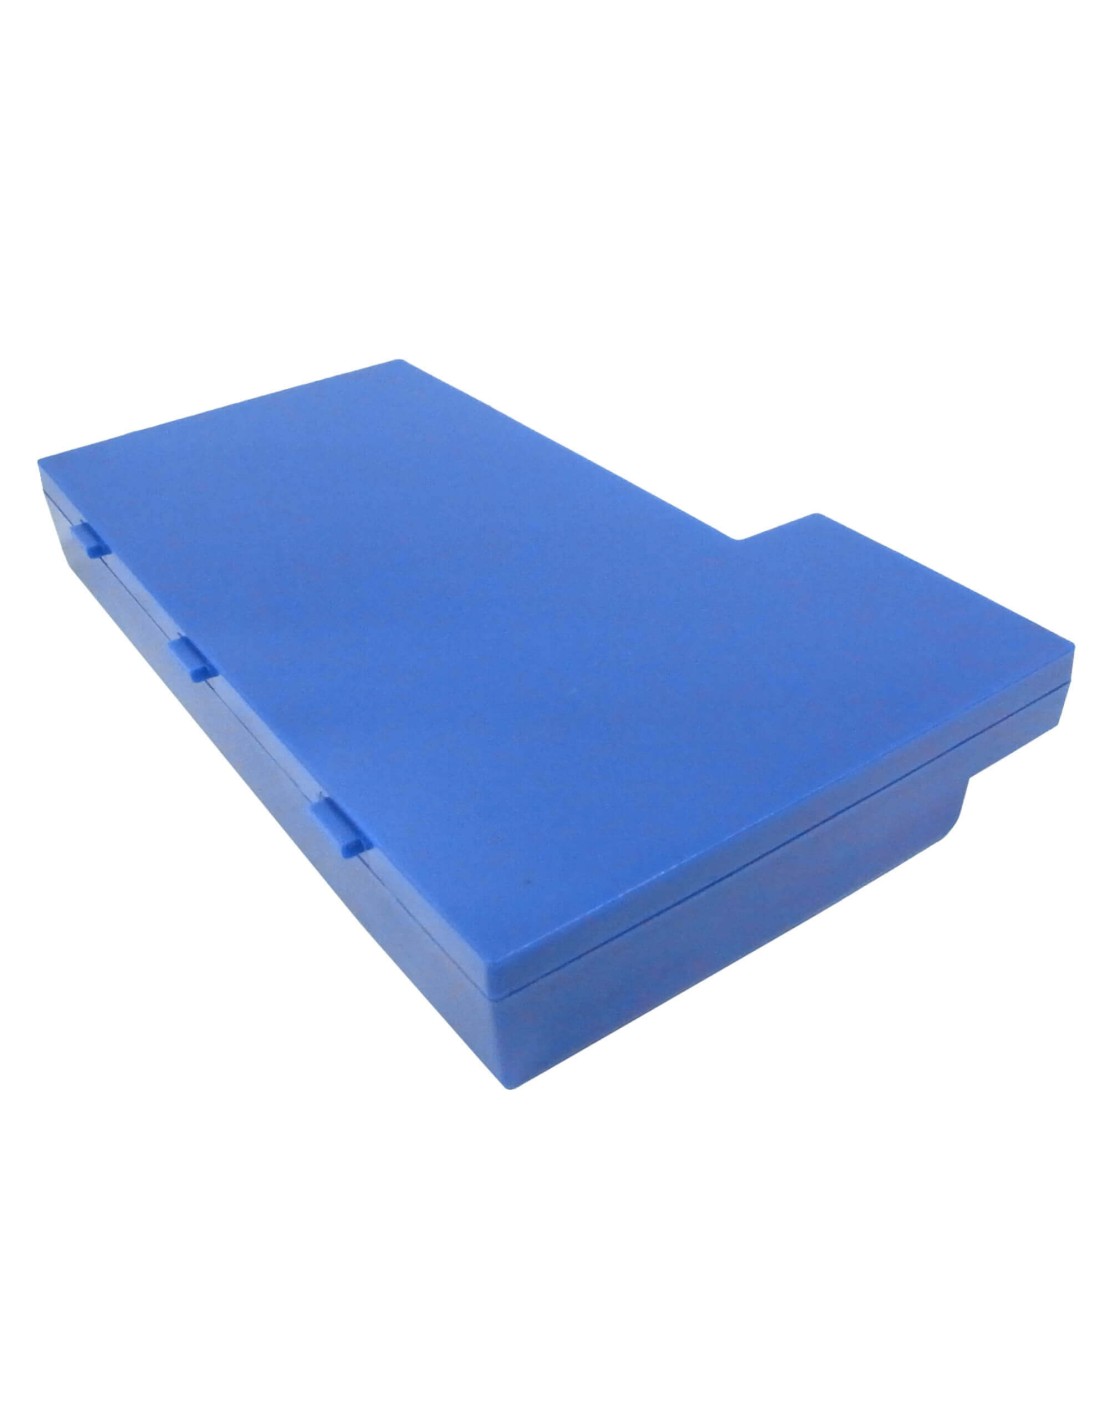 Blue Battery for Fic A3, A360, A380 14.8V, 4400mAh - 65.12Wh